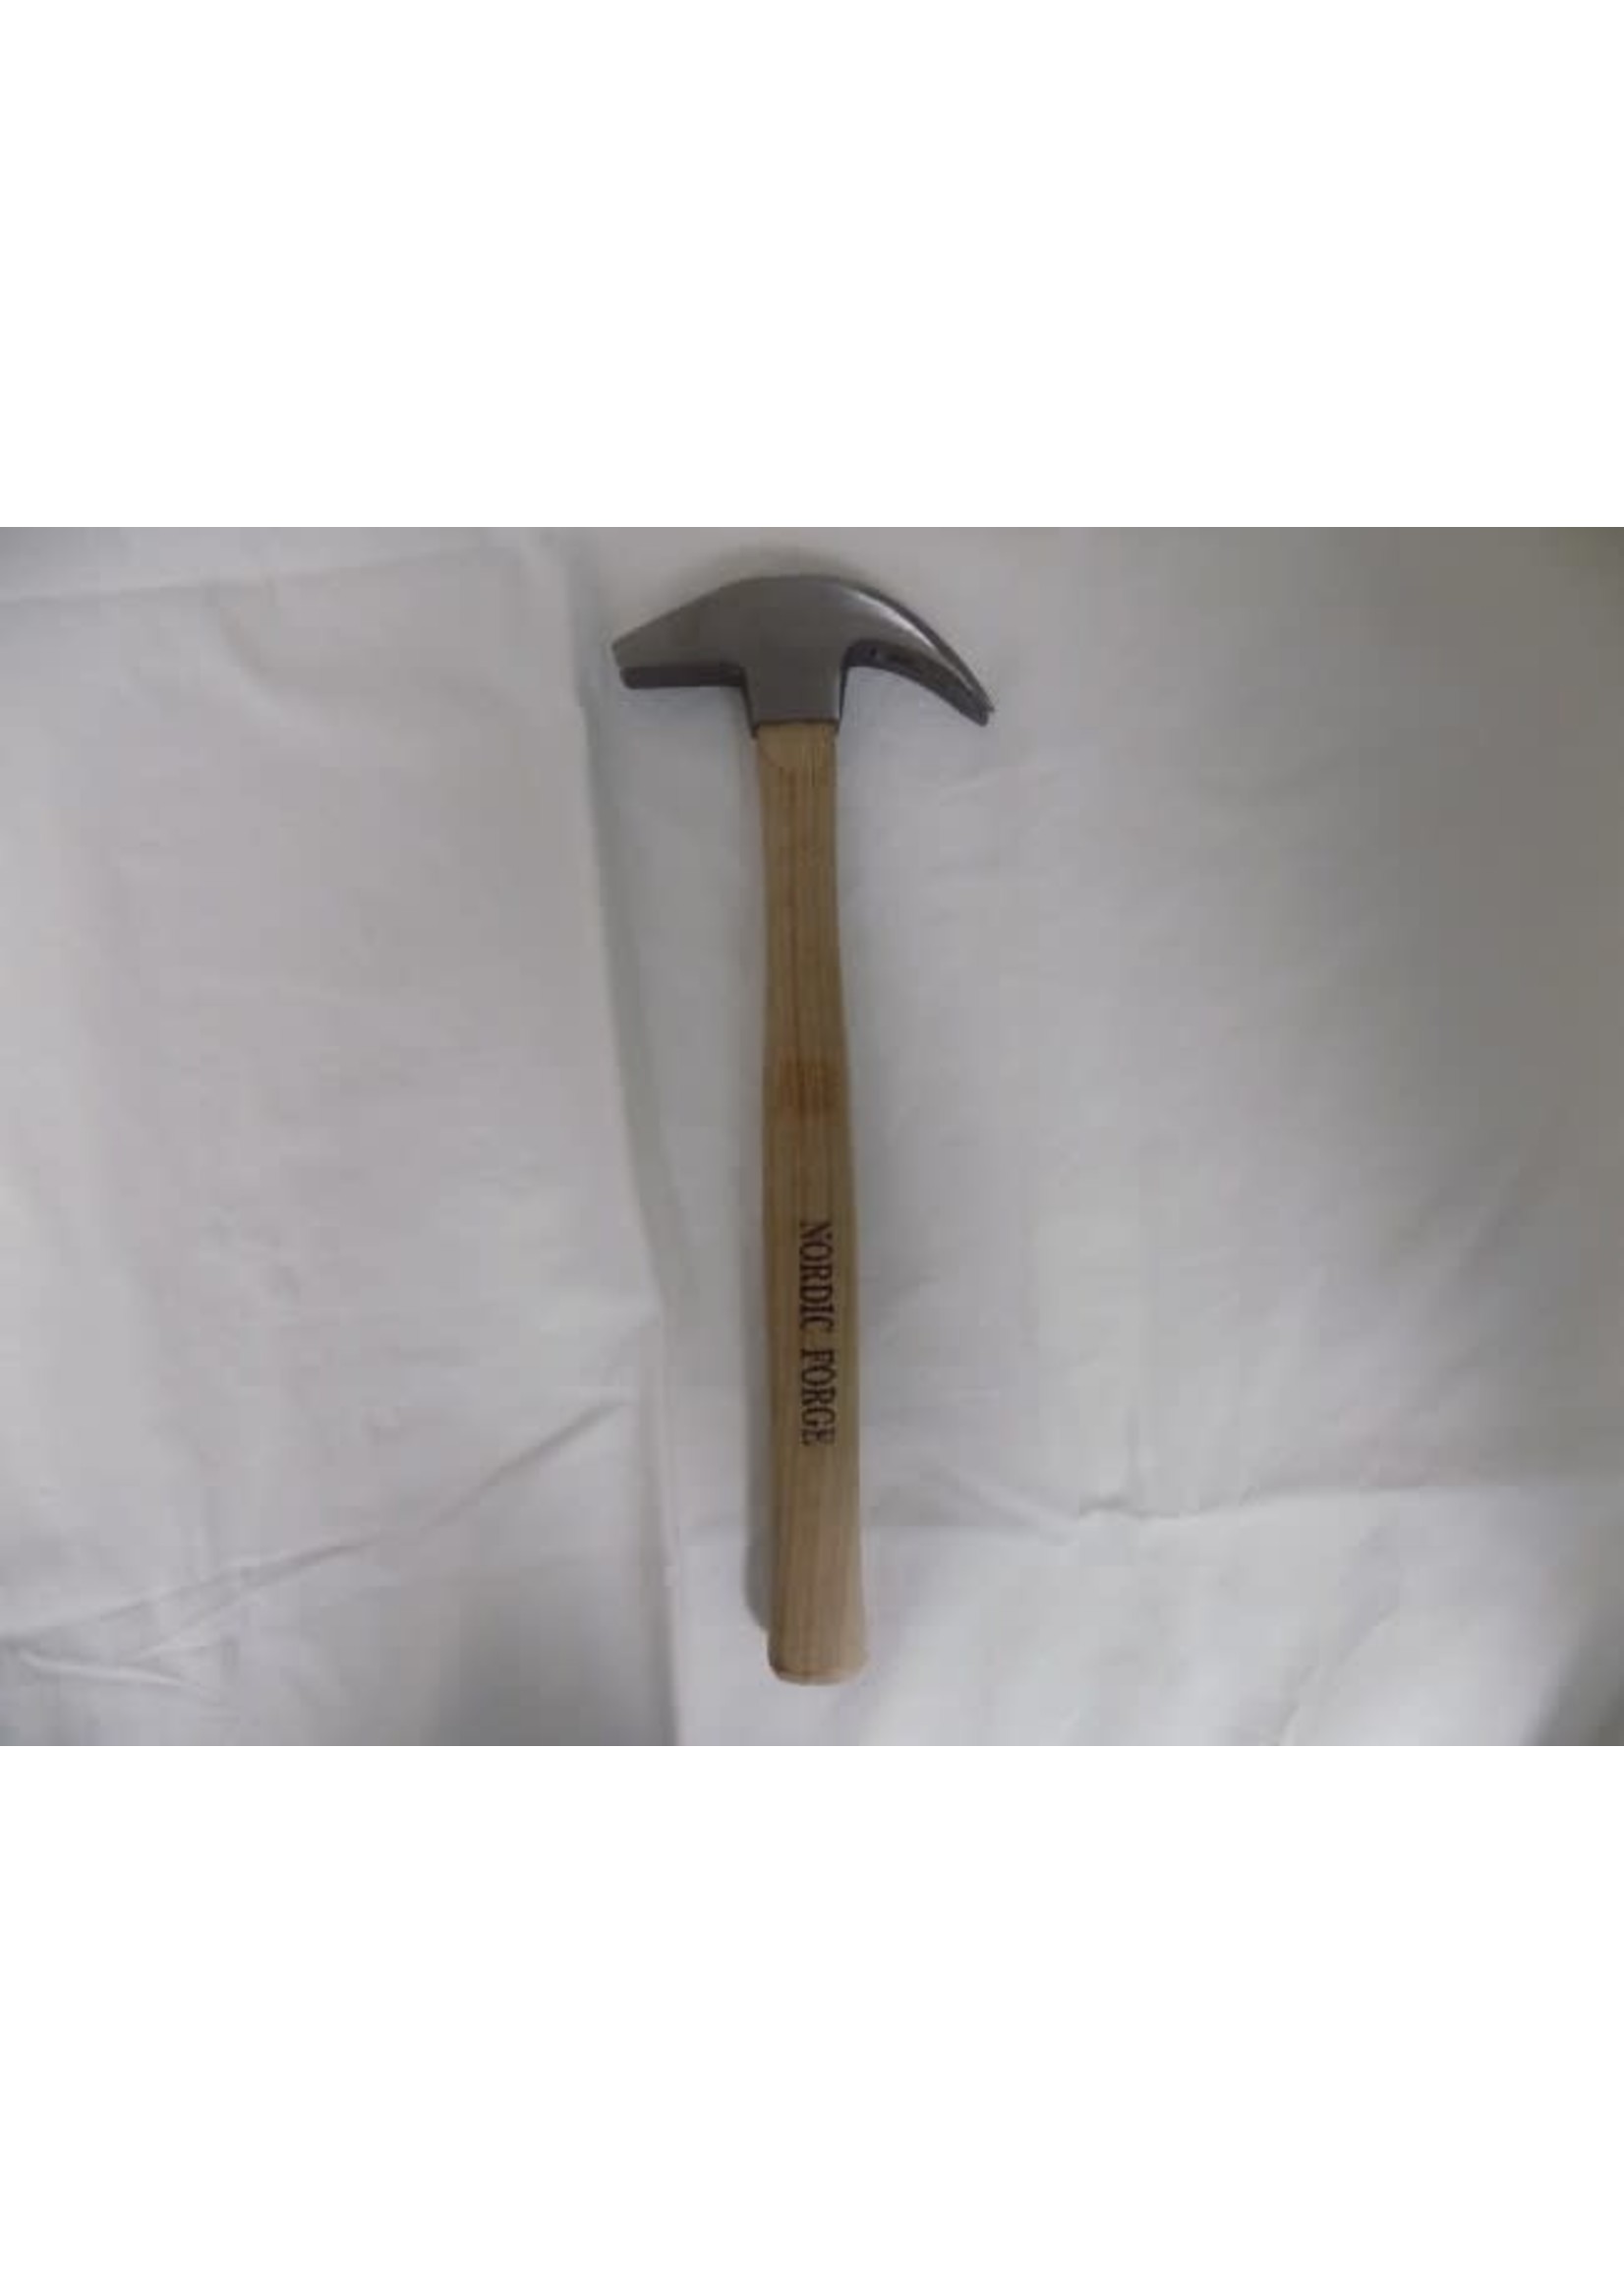 Nordic Forge Nordic driving hammer 12 oz.